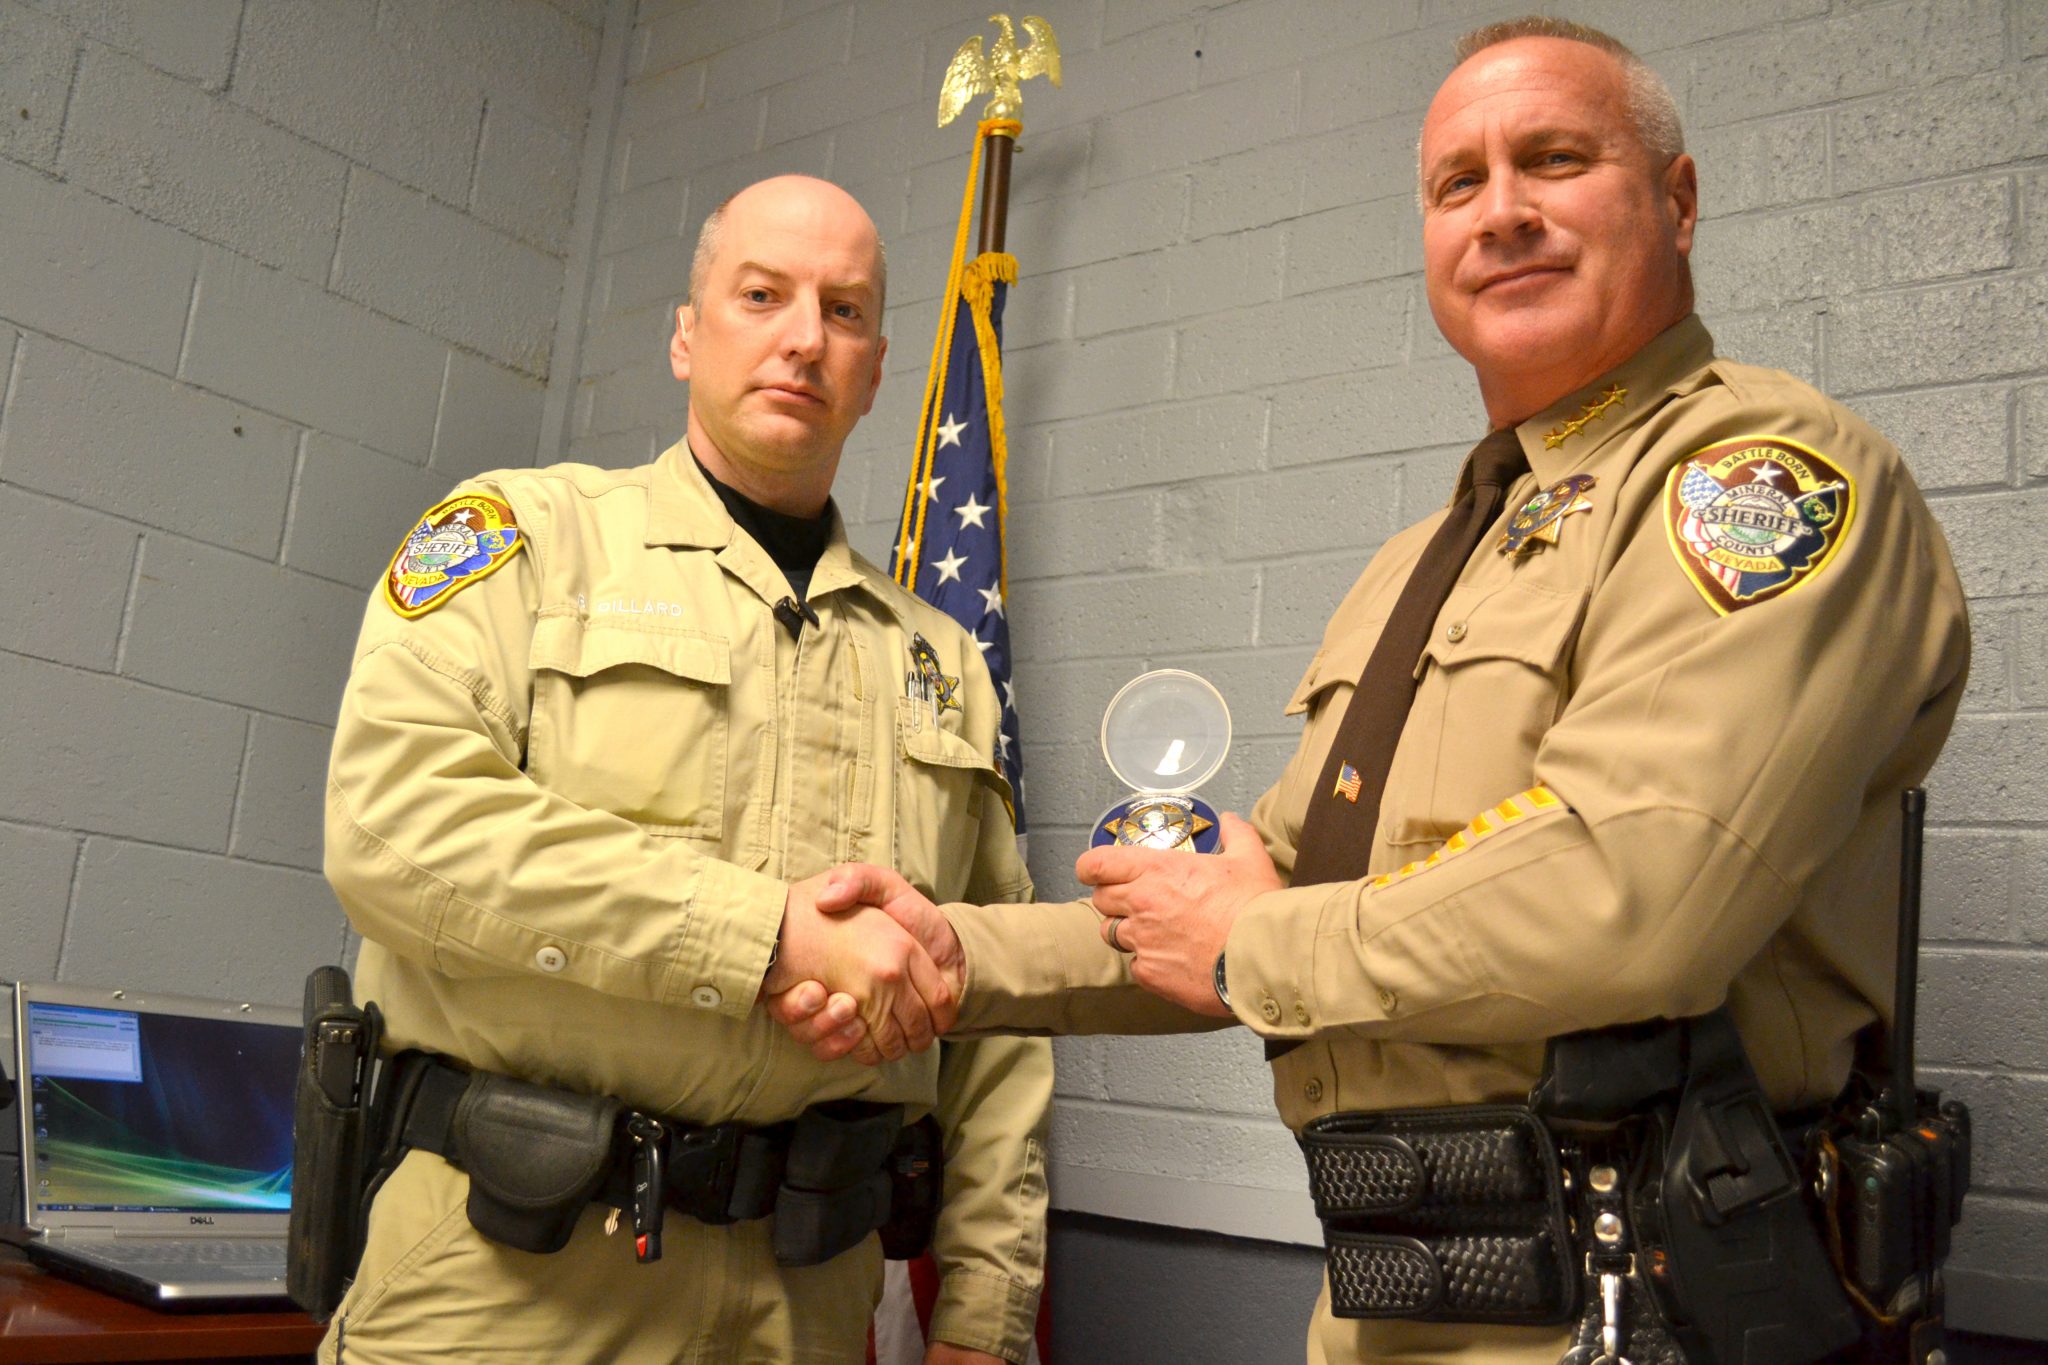 Dillard promoted to Lieutenant of Mineral County Sheriff’s Department